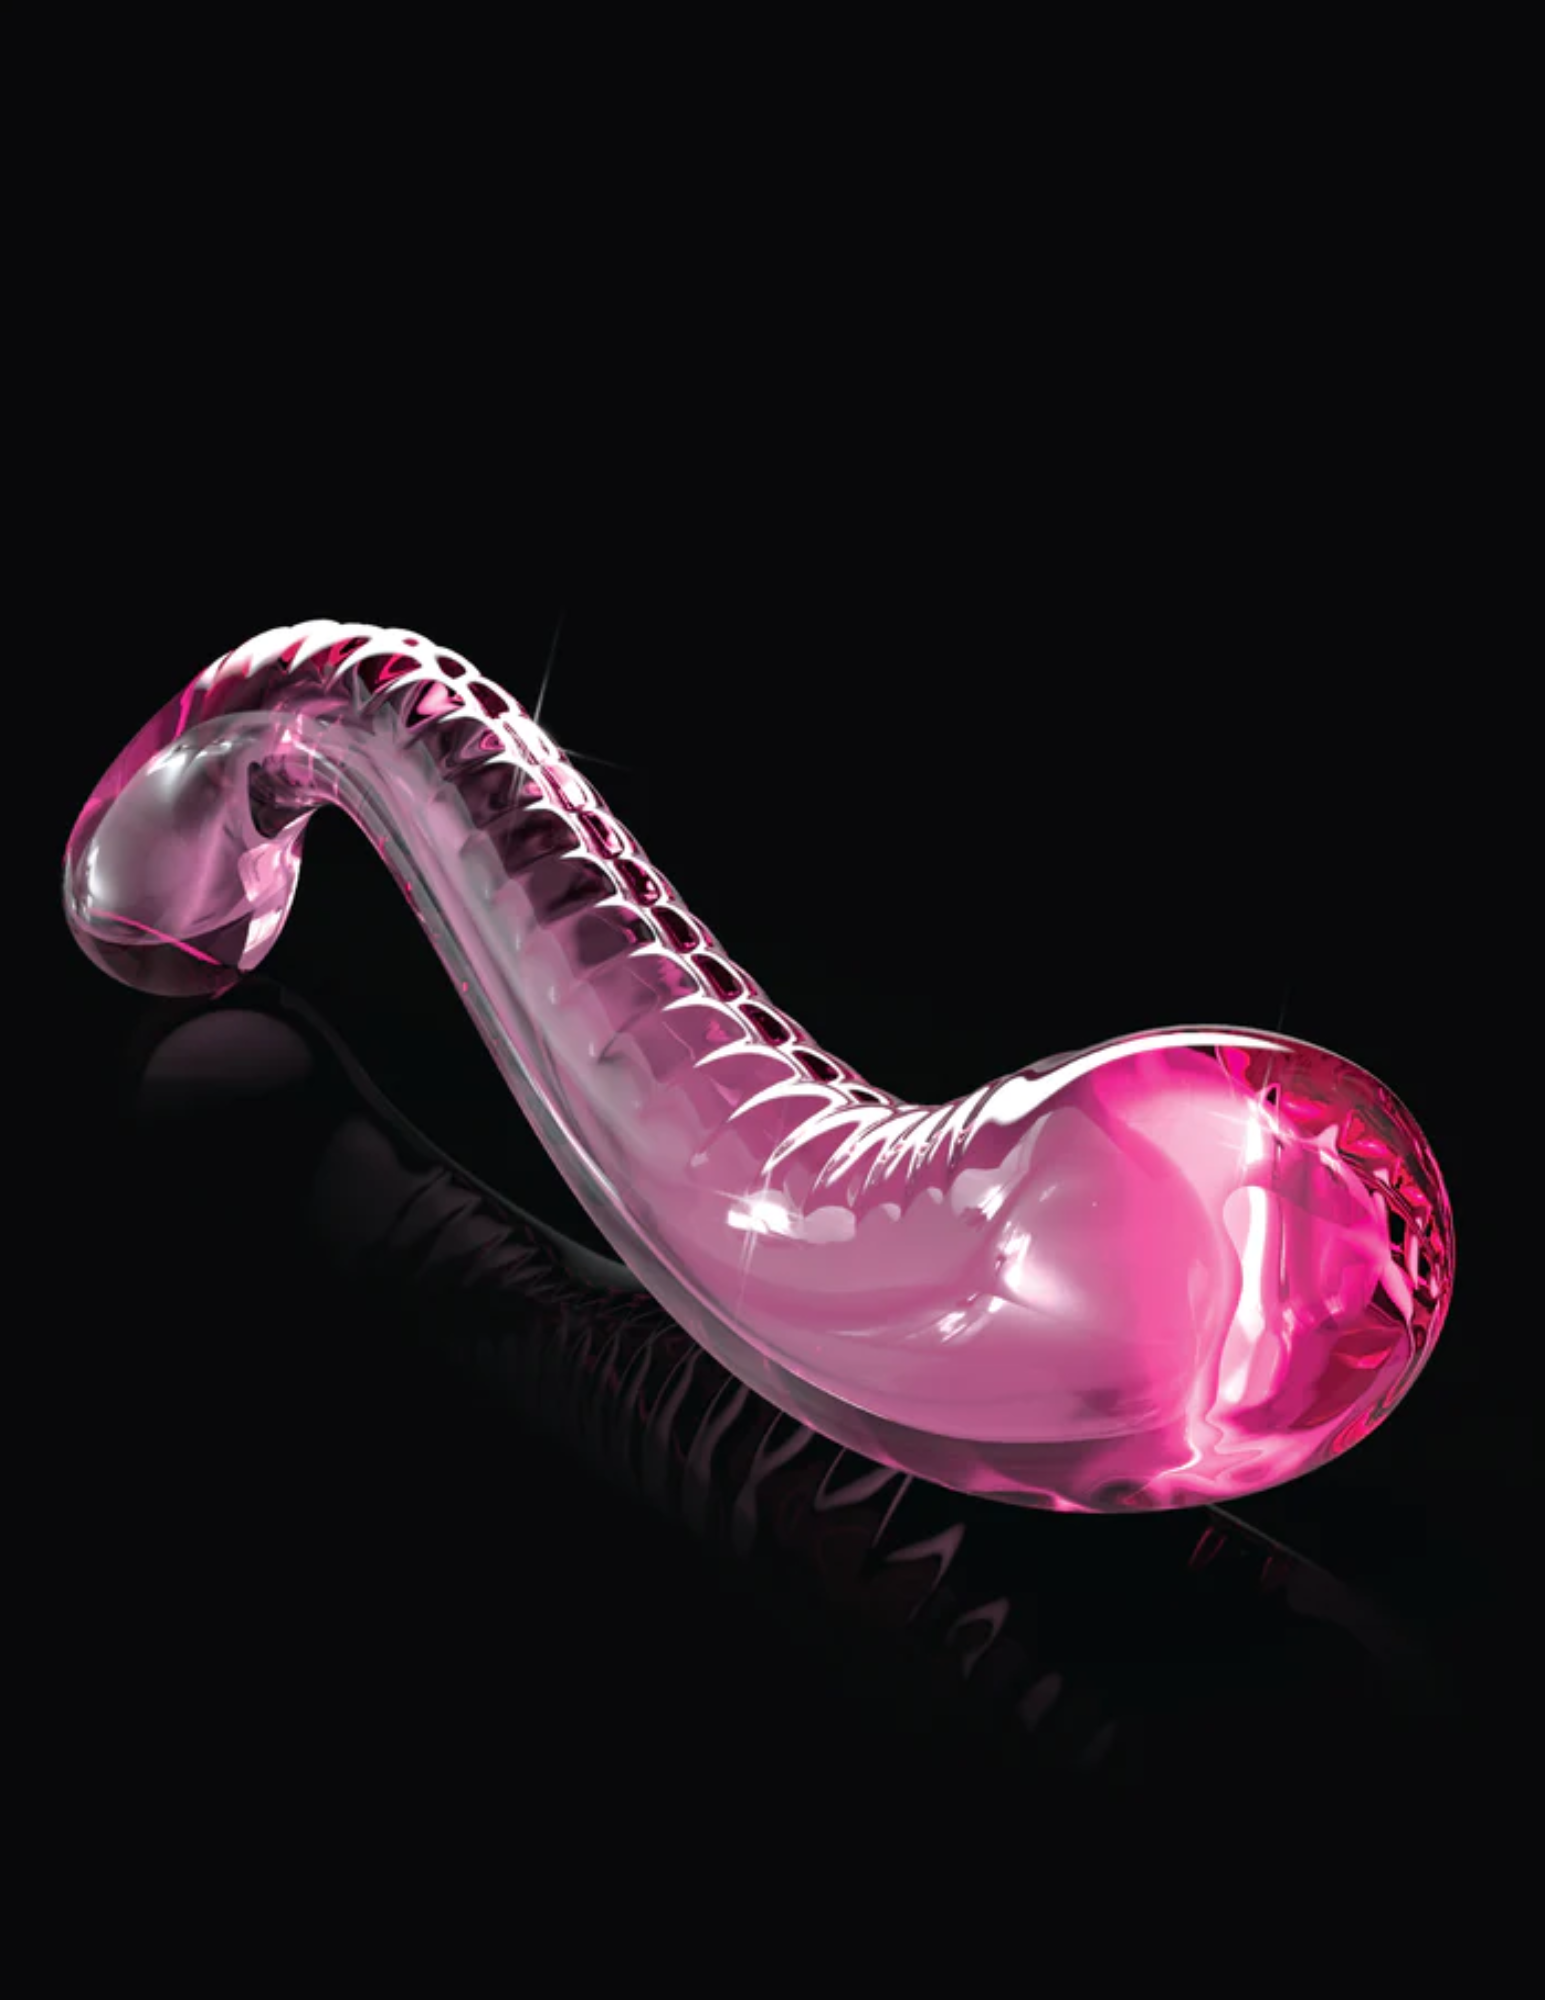 Front angled view of the Icicles No. 69 Textured G-Spot Glass Probe from Pipedreams (pink) shows its prominent G-spot head for maximum pleasure.